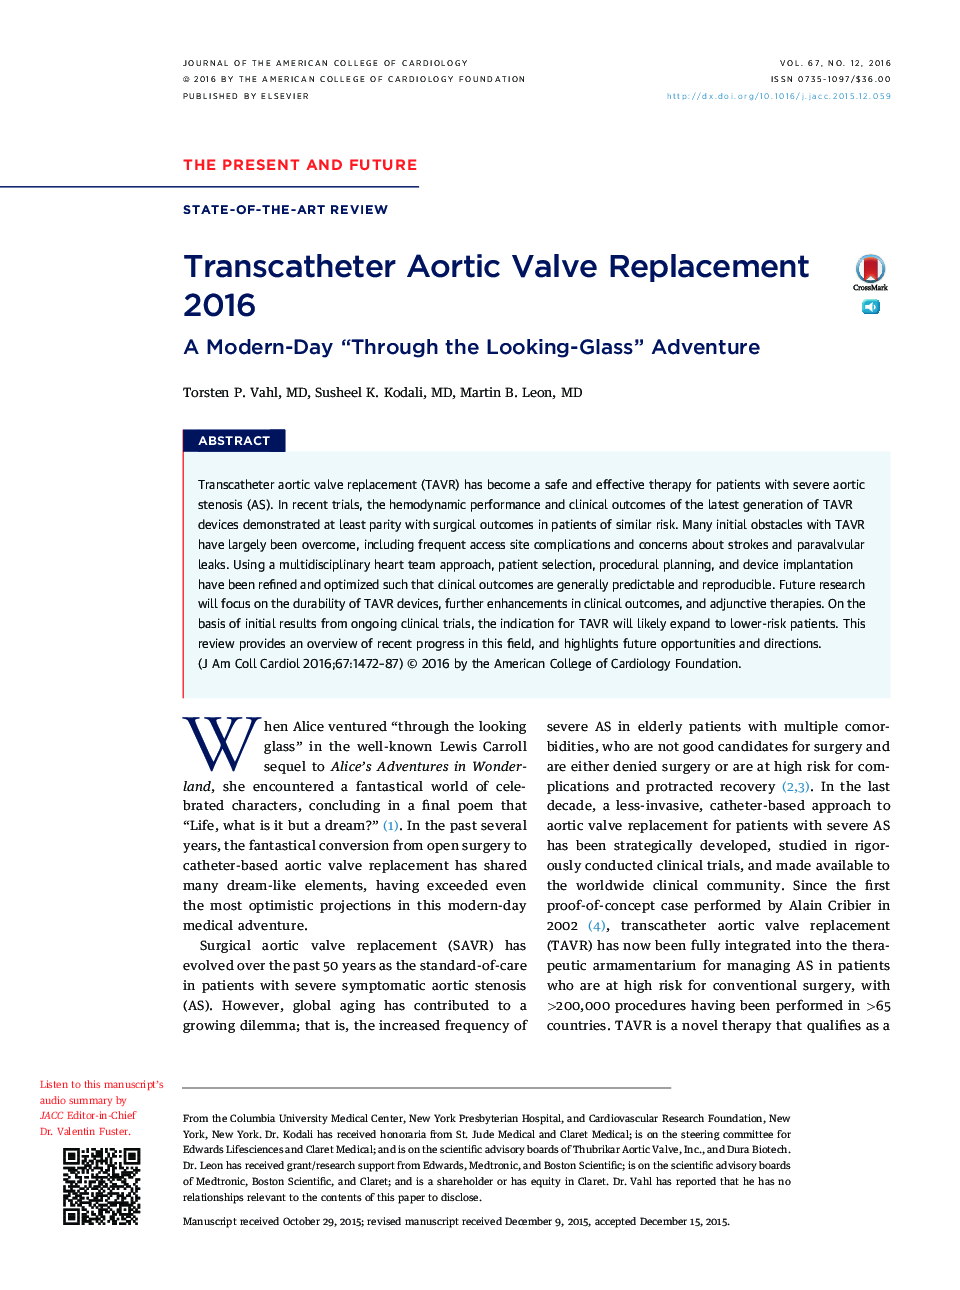 Transcatheter Aortic Valve Replacement 2016: A Modern-Day “Through the Looking-Glass” Adventure